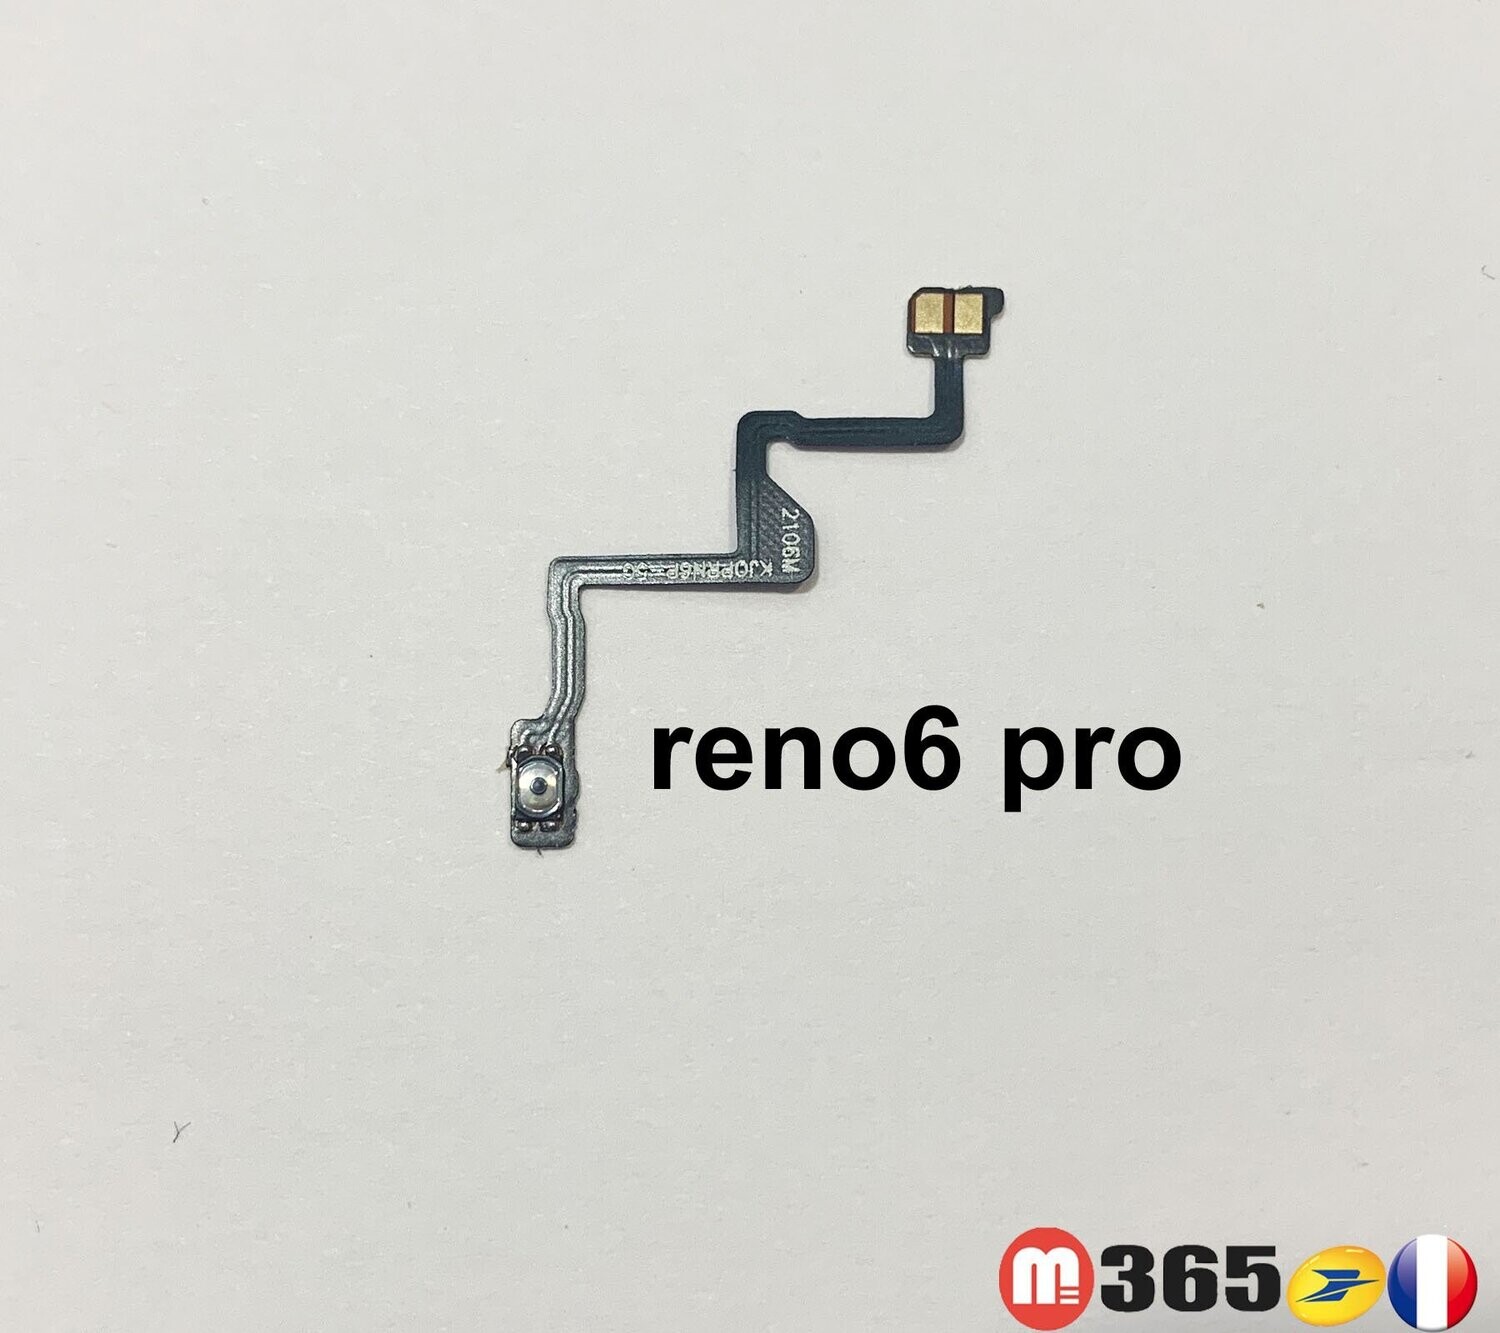 Oppo reno6 pro nappe interrupteur power on off oppo reno6 pro nappe on/off